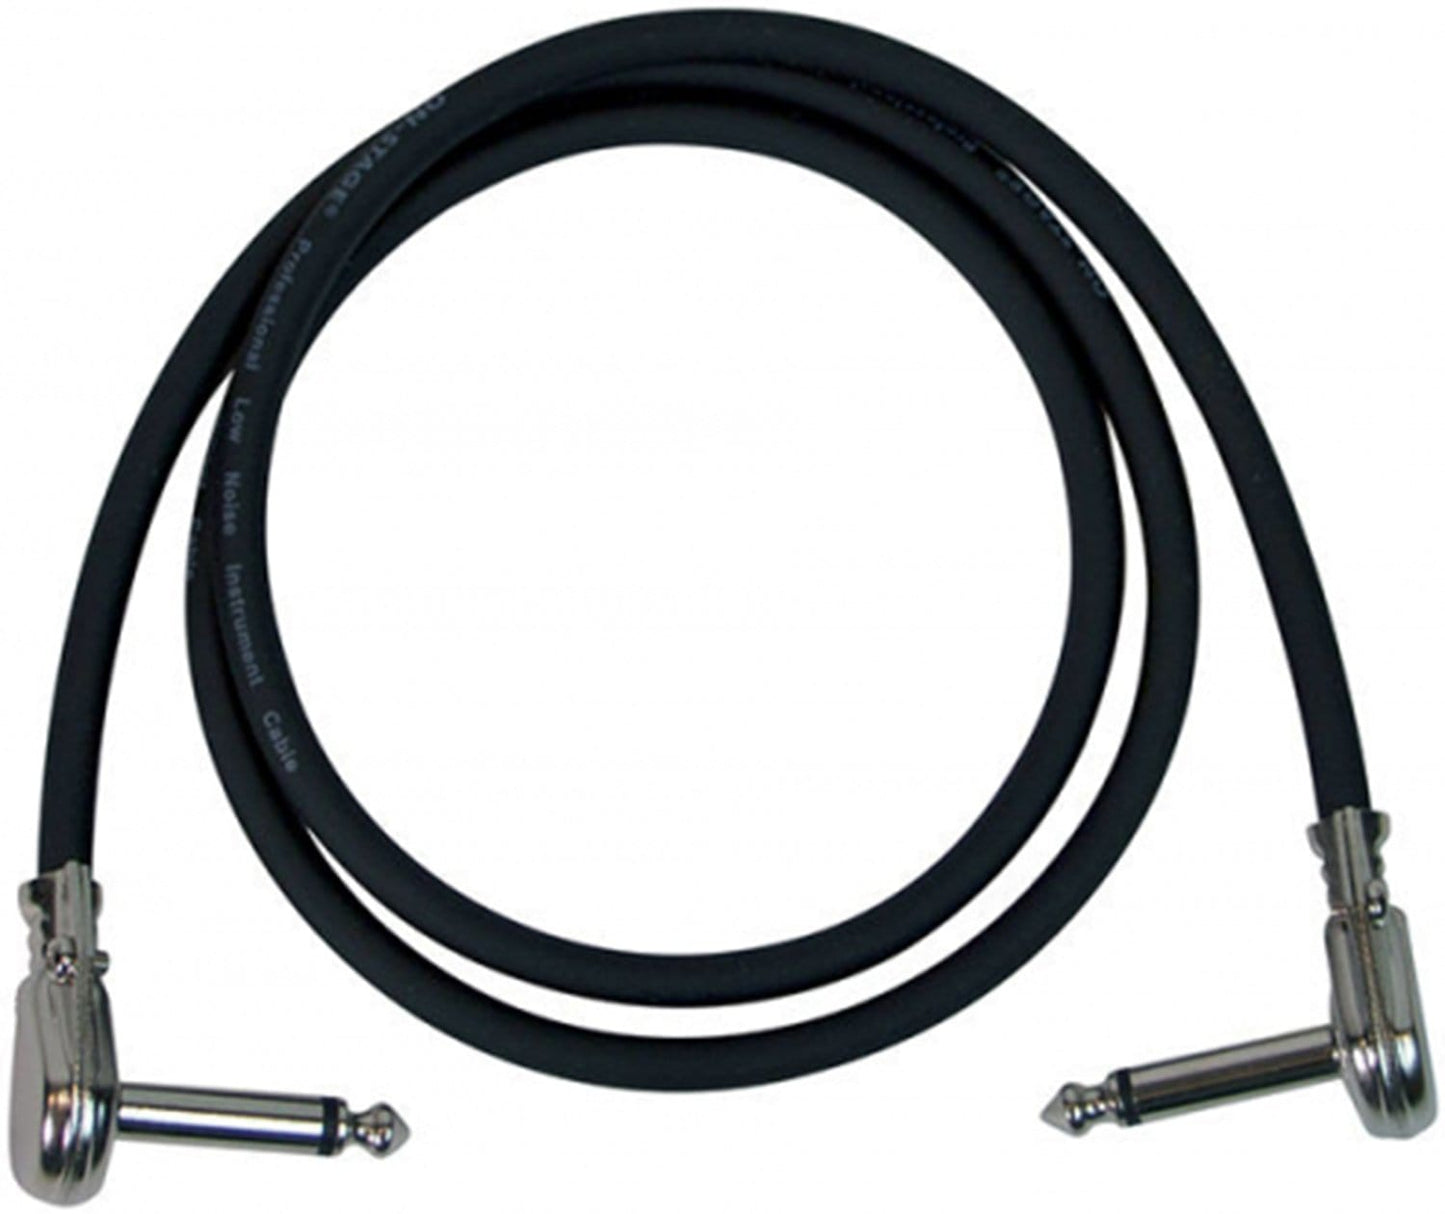 On-Stage PC536B Pancake Style 1/4 TS to 1/4 TS Patch Cable 3-Foot - PSSL ProSound and Stage Lighting